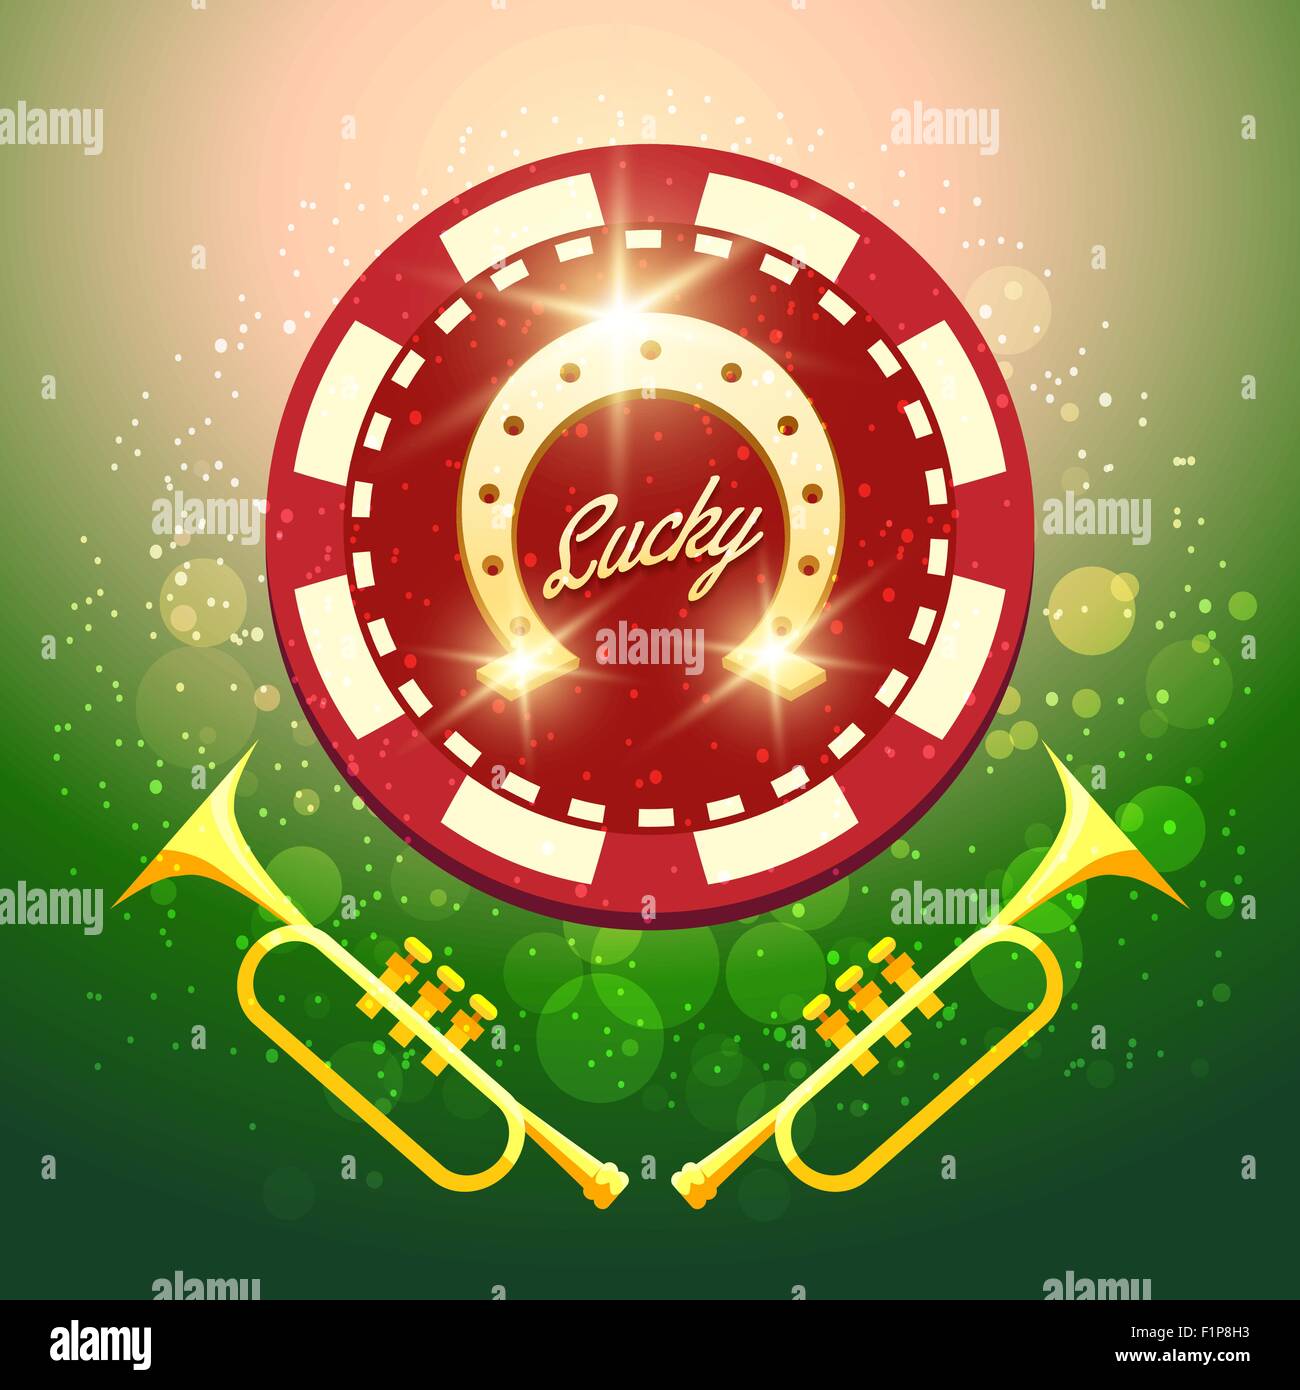 Horseshoe Casino chip with lettering Lucky and two trumpets against festive background. Stock Vector